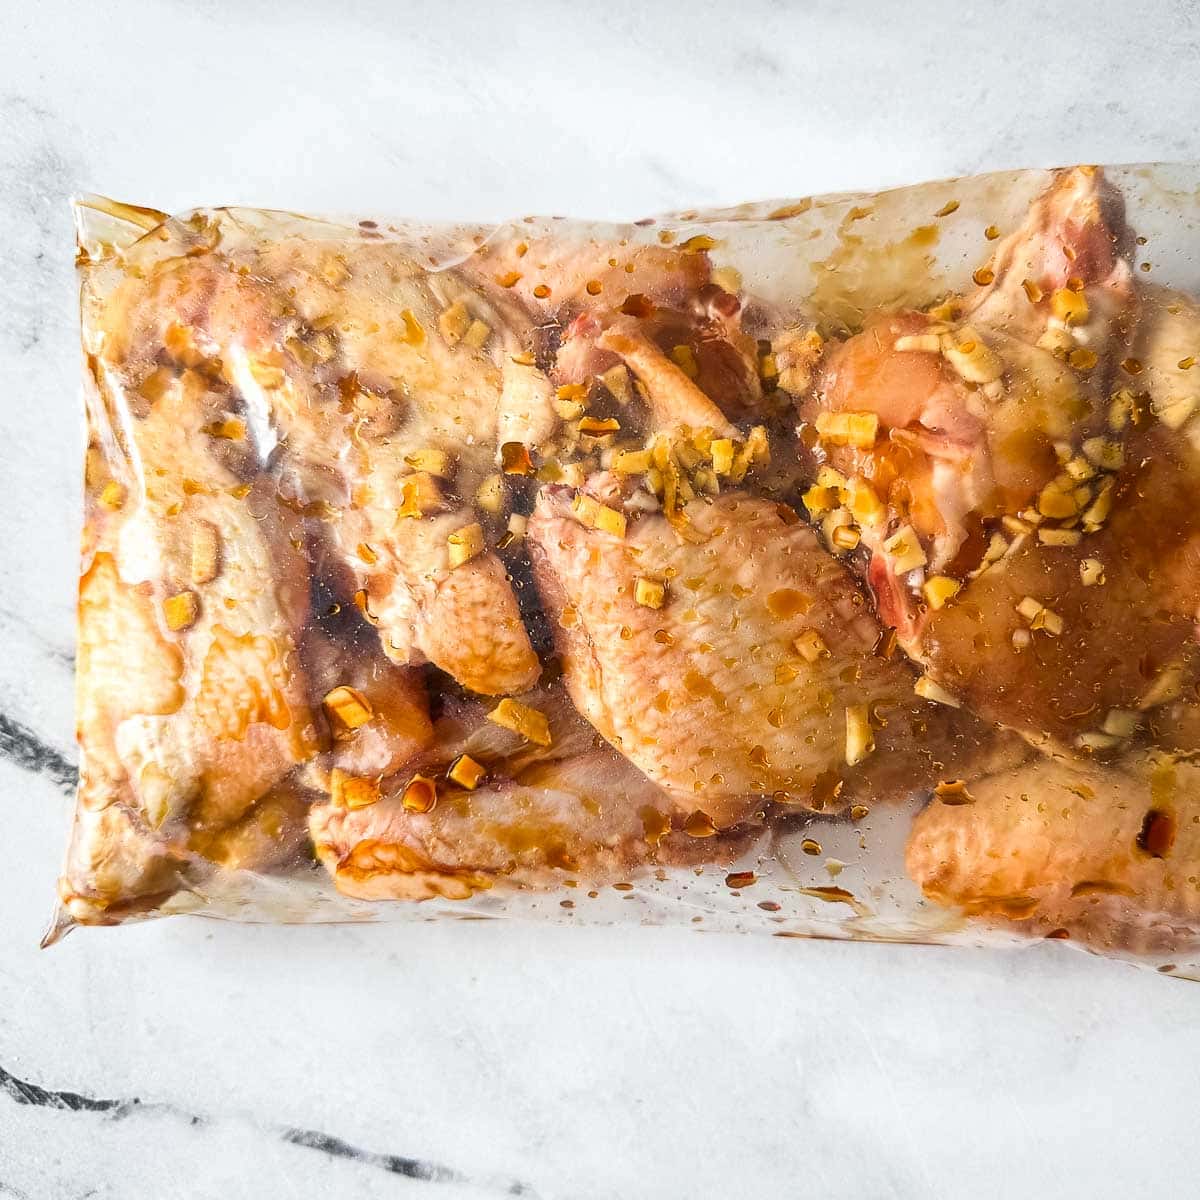 Chicken wings are marinated in a plastic bag with soy garlic ginger marinade.